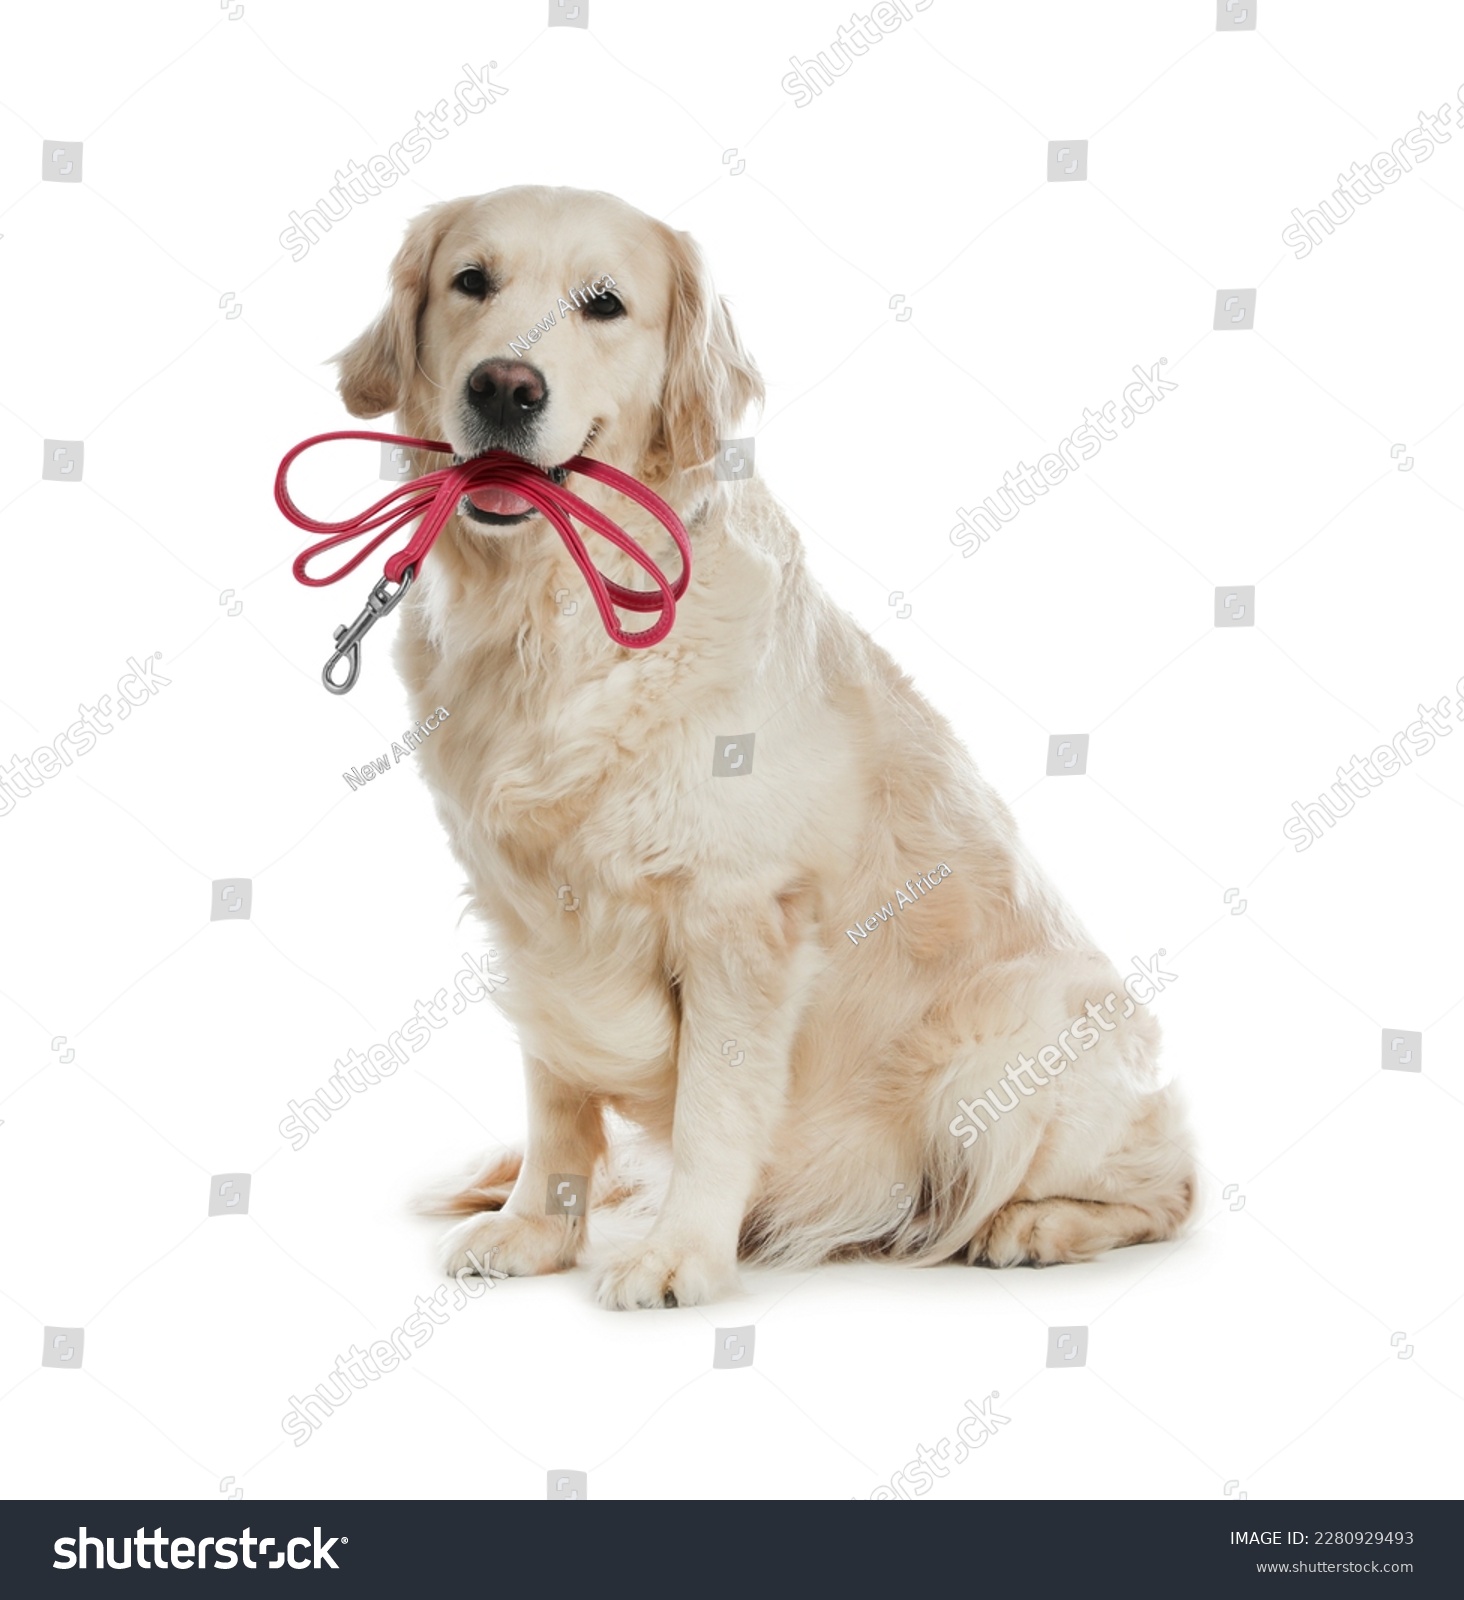 Adorable Golden Retriever dog holding leash in mouth on white background #2280929493